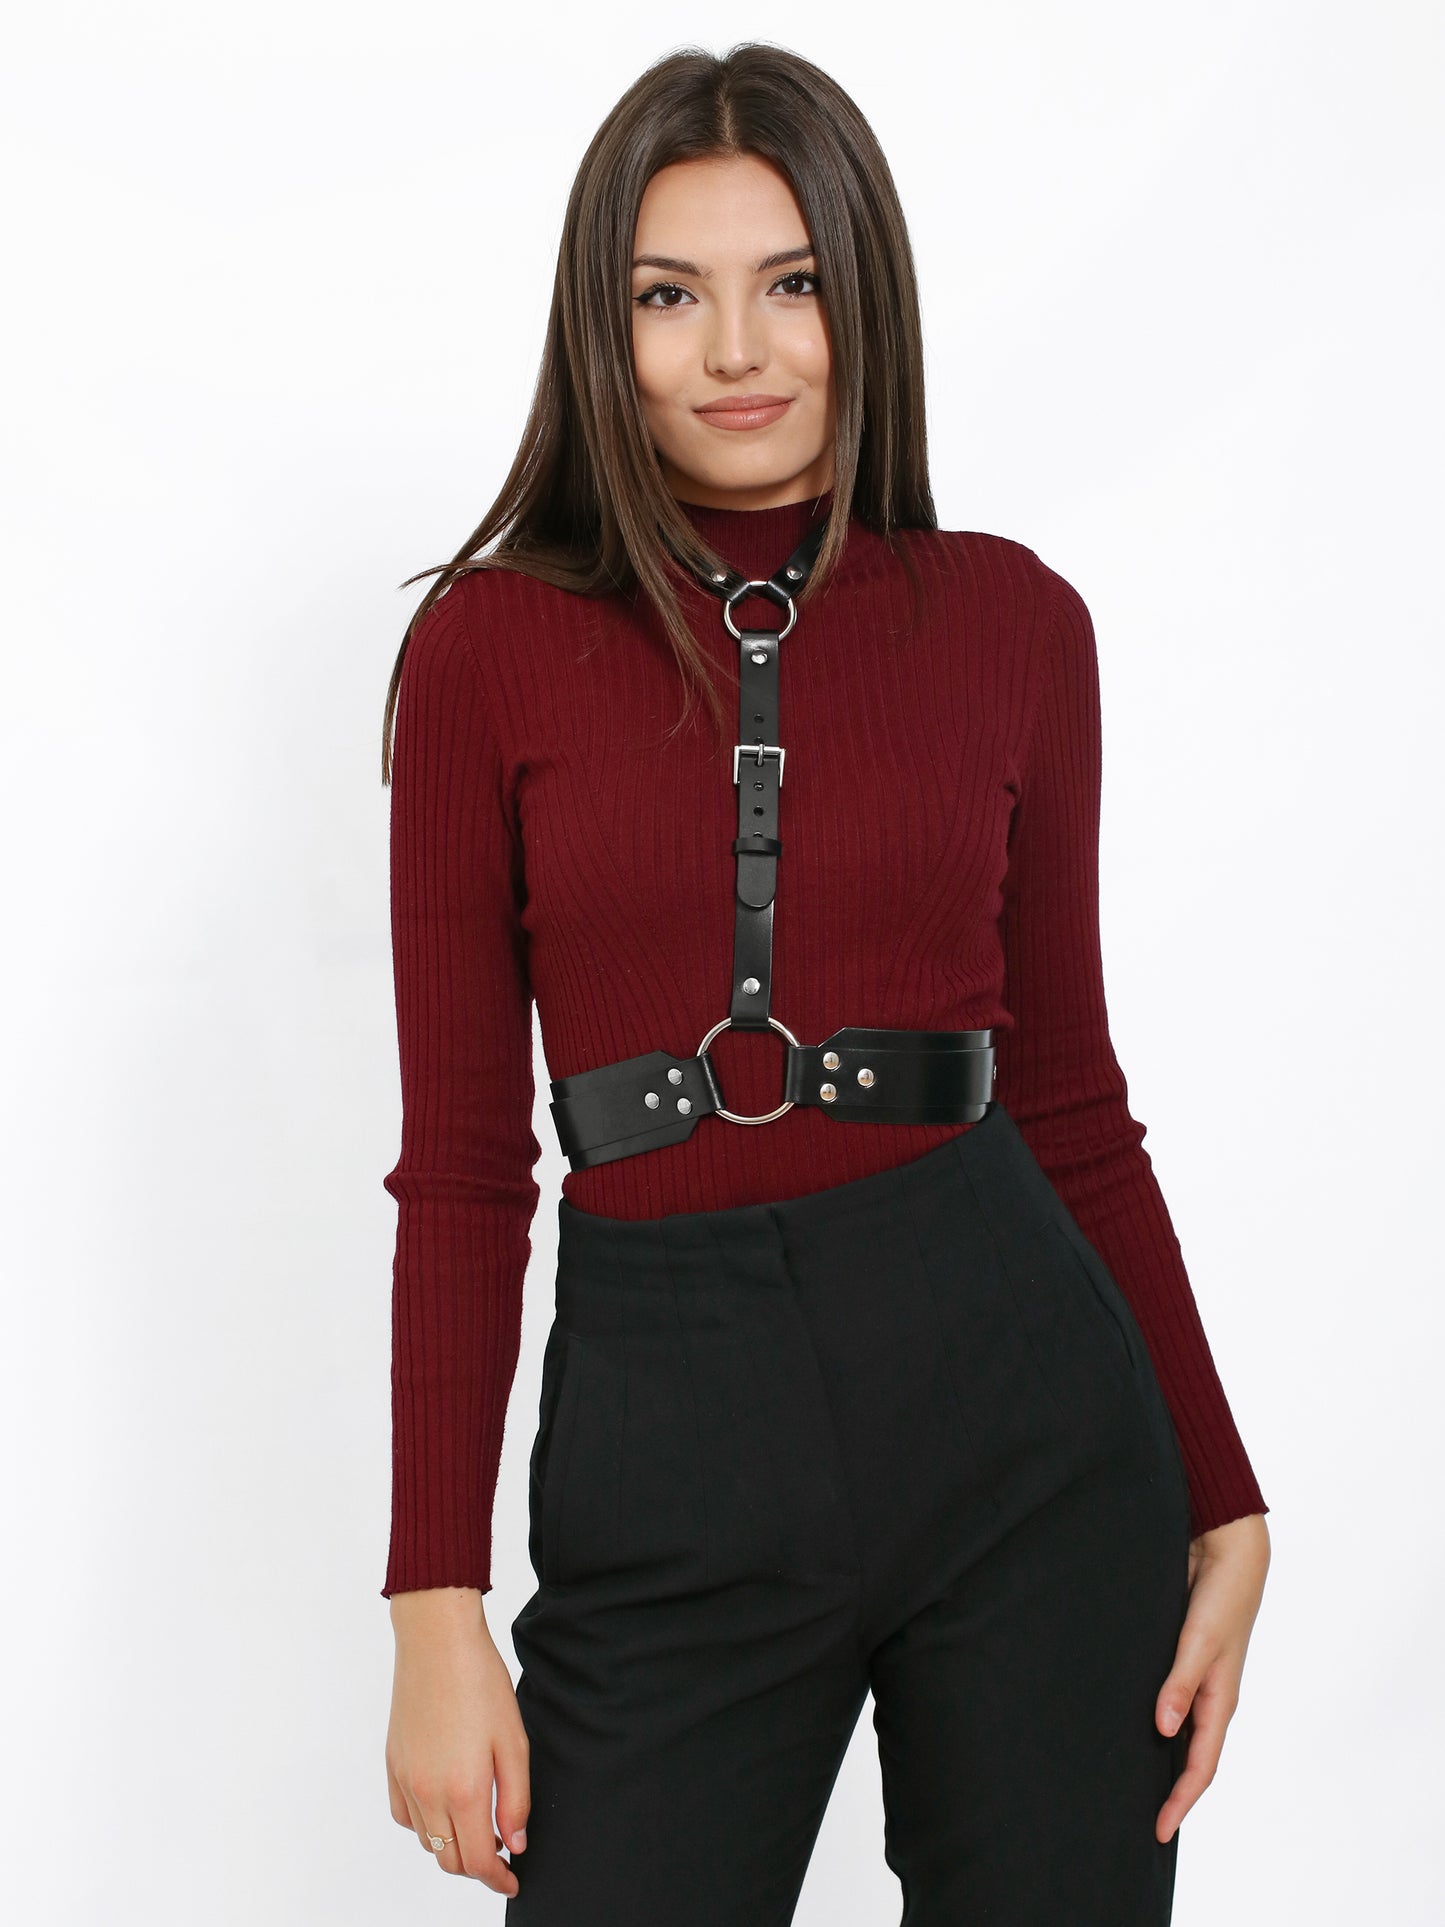 Black Leather Harness over a burgundy blouse